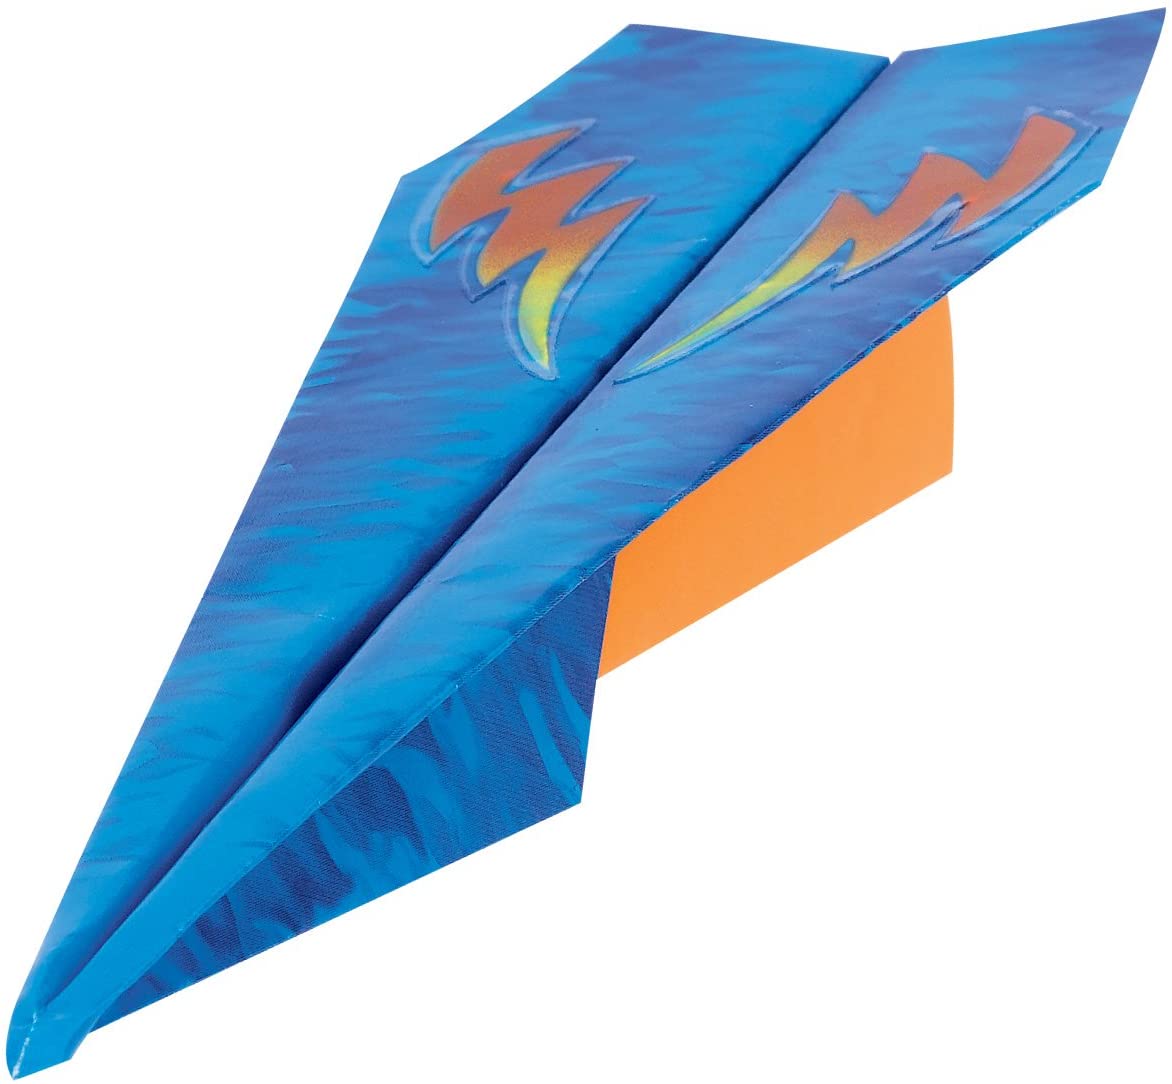 Supercool Paper Airplanes Kit: 12 Pop-Out Paper Airplanes Assembled in About a Minute: Kit Includes Instruction Book, Pre-Printed Planes & Catapult Launcher [Book]